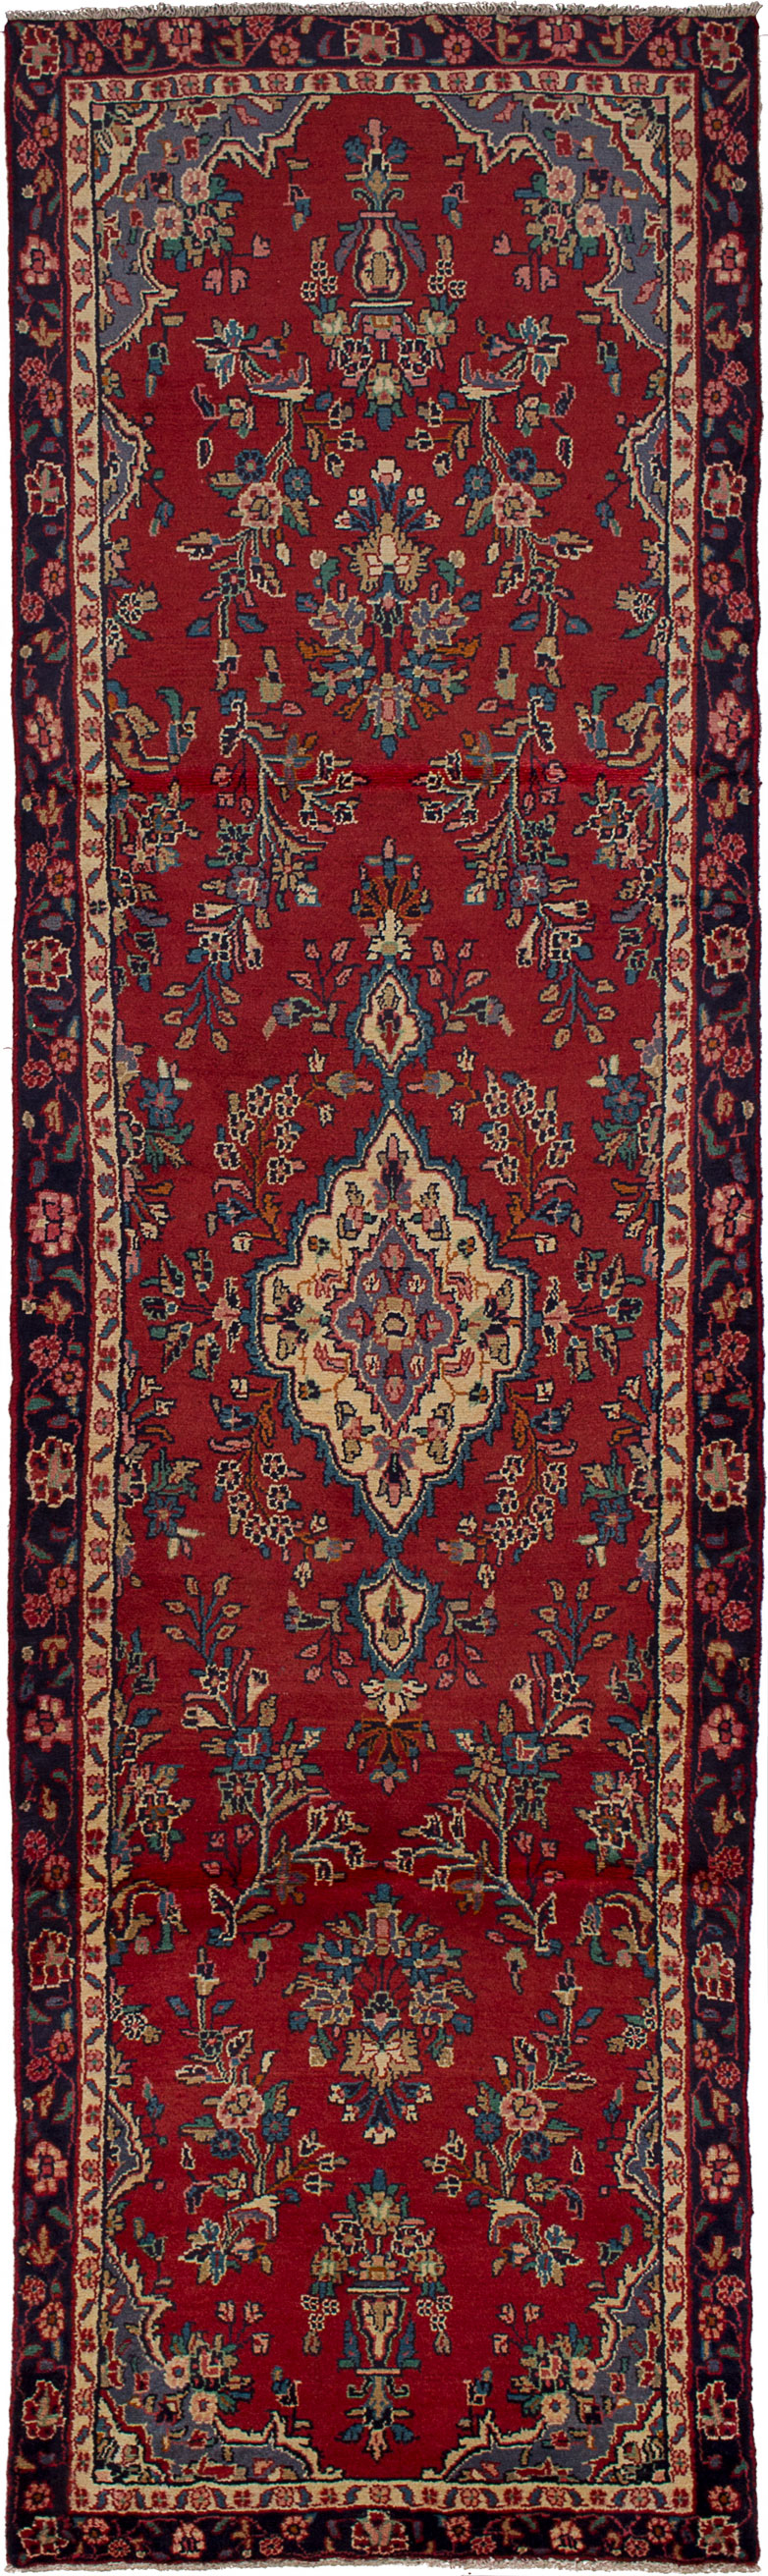 Hand-knotted Hamadan Red Wool Rug 2'10" x 10'0"  Size: 2'10" x 10'0"  